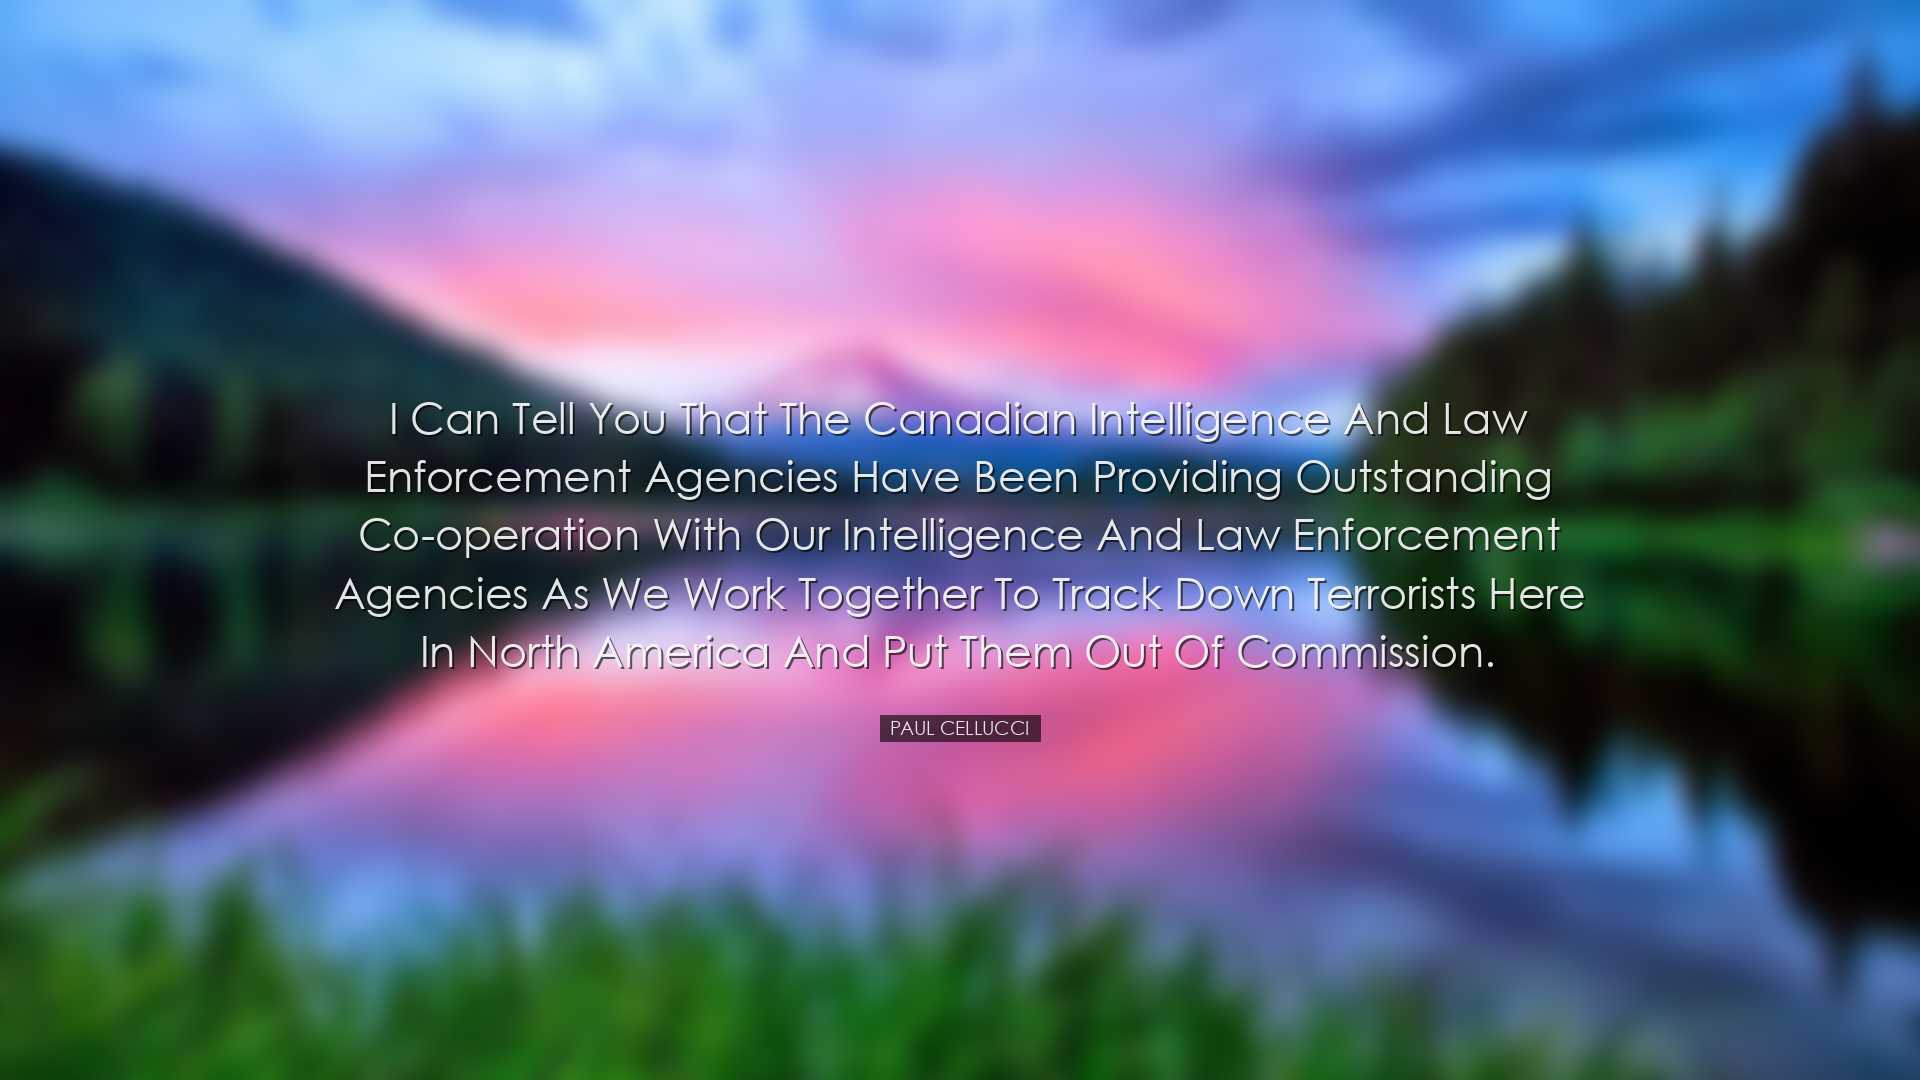 I can tell you that the Canadian intelligence and law enforcement